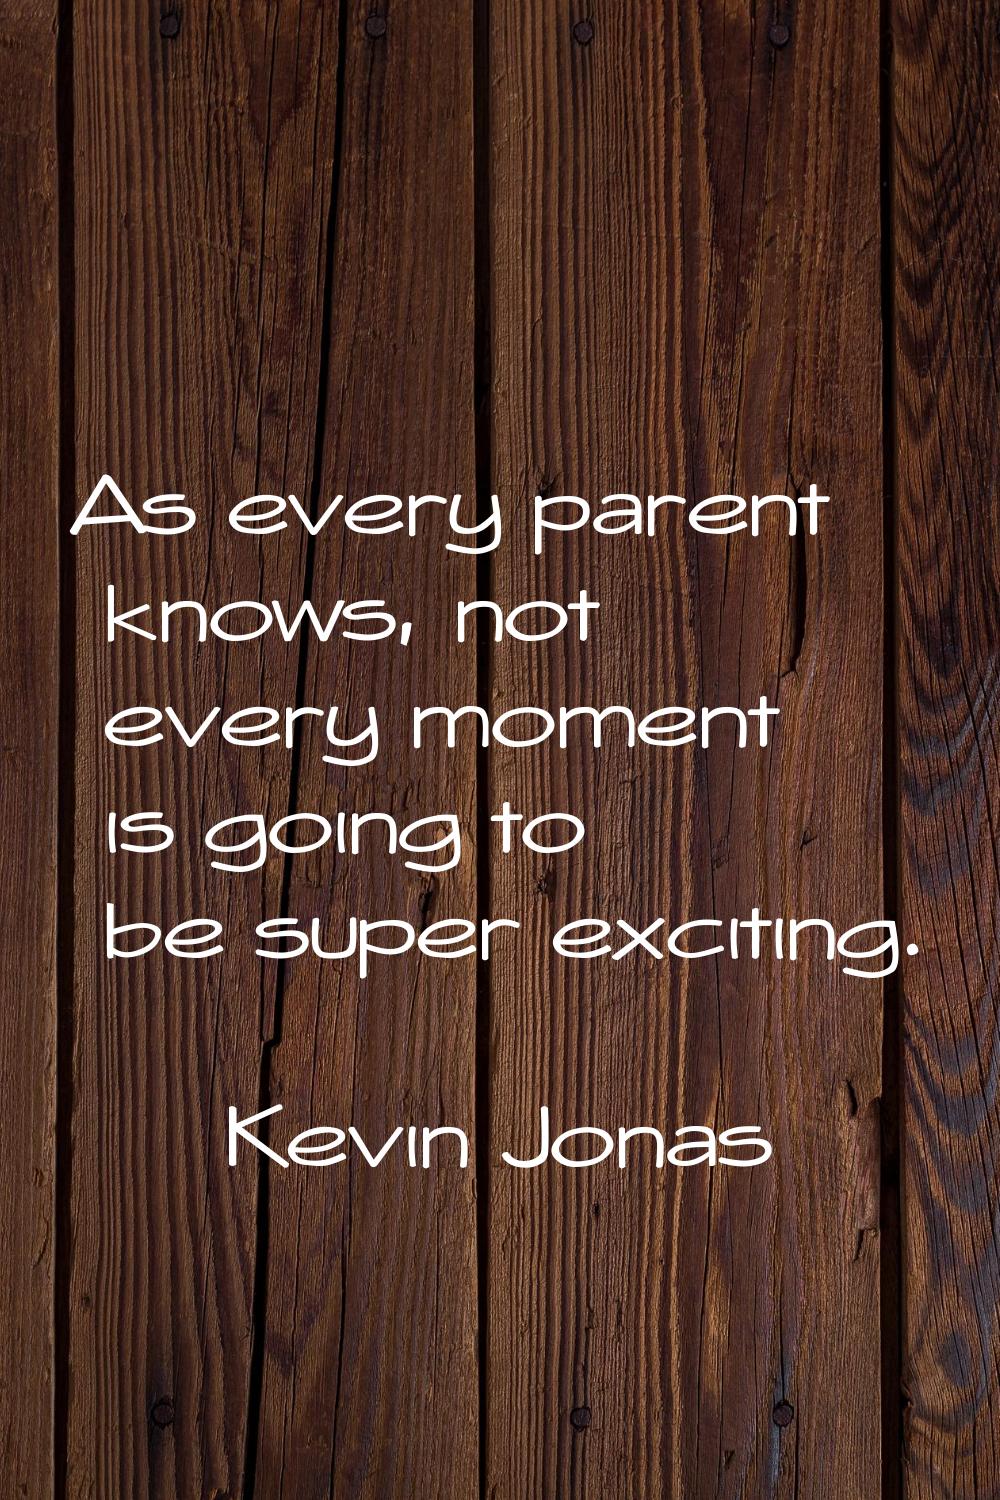 As every parent knows, not every moment is going to be super exciting.